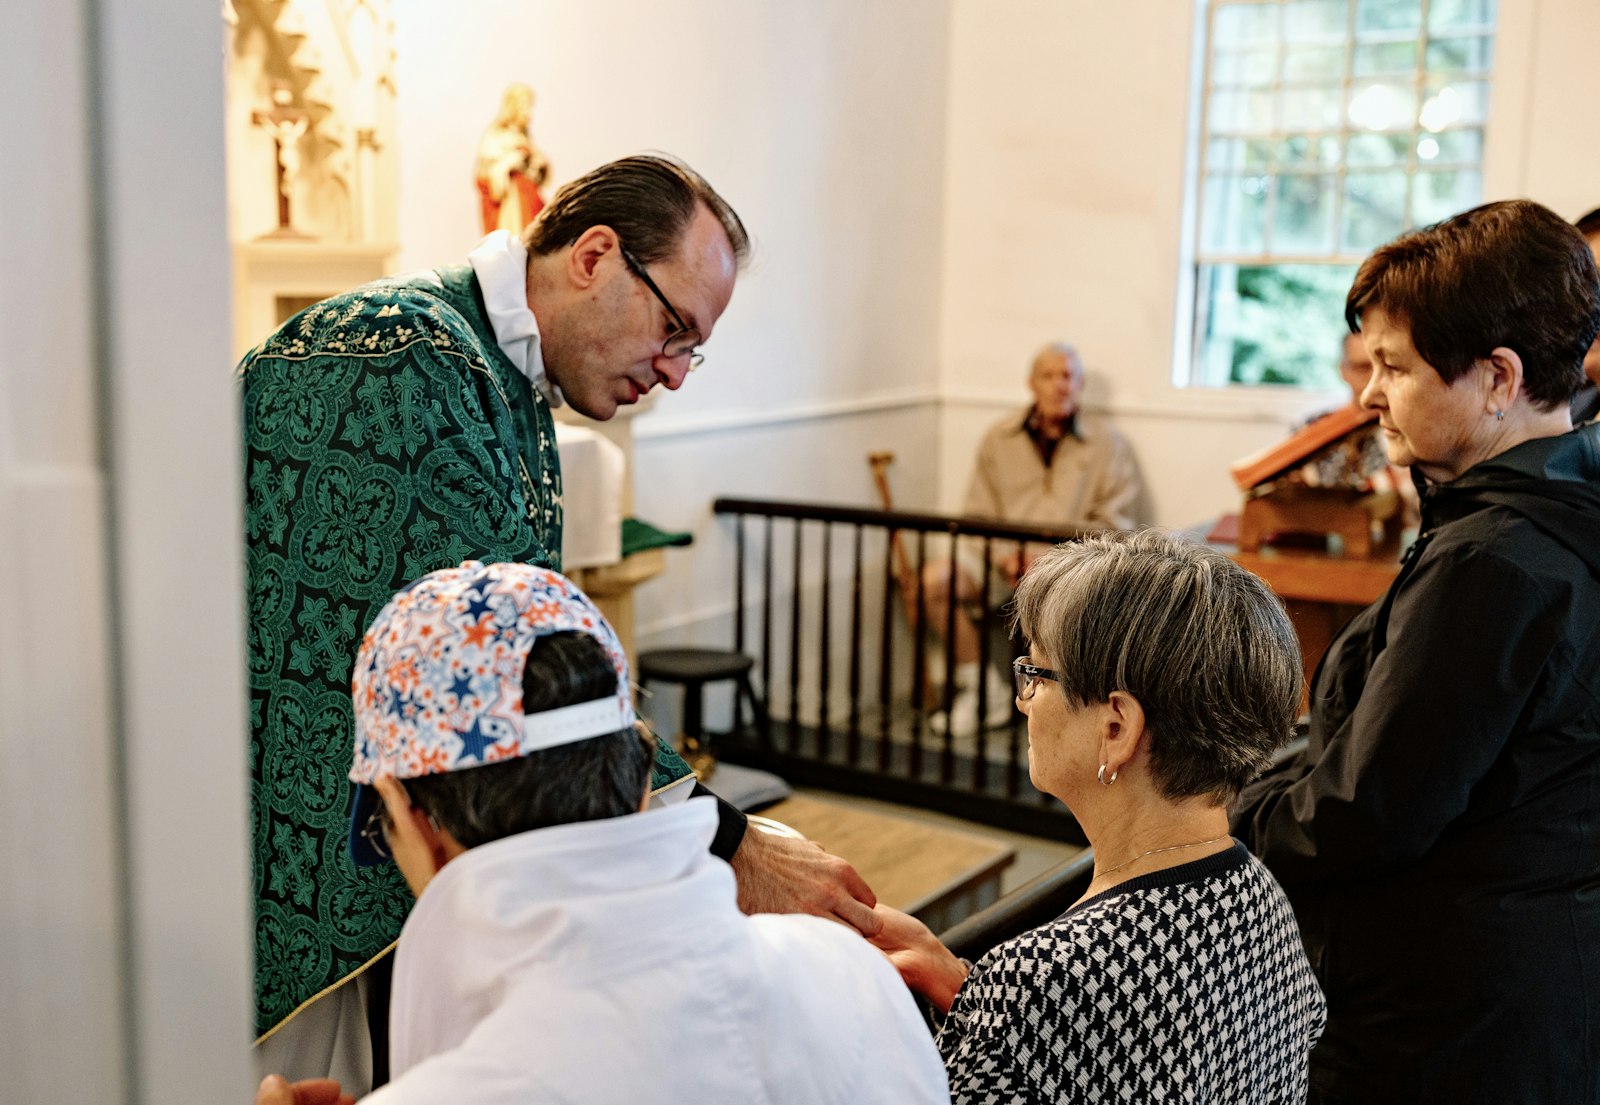 Fr. David Cybulski, moderator and priest in solidum at St. Patrick, distributes Communion during Mass inside the historic chapel May 27.